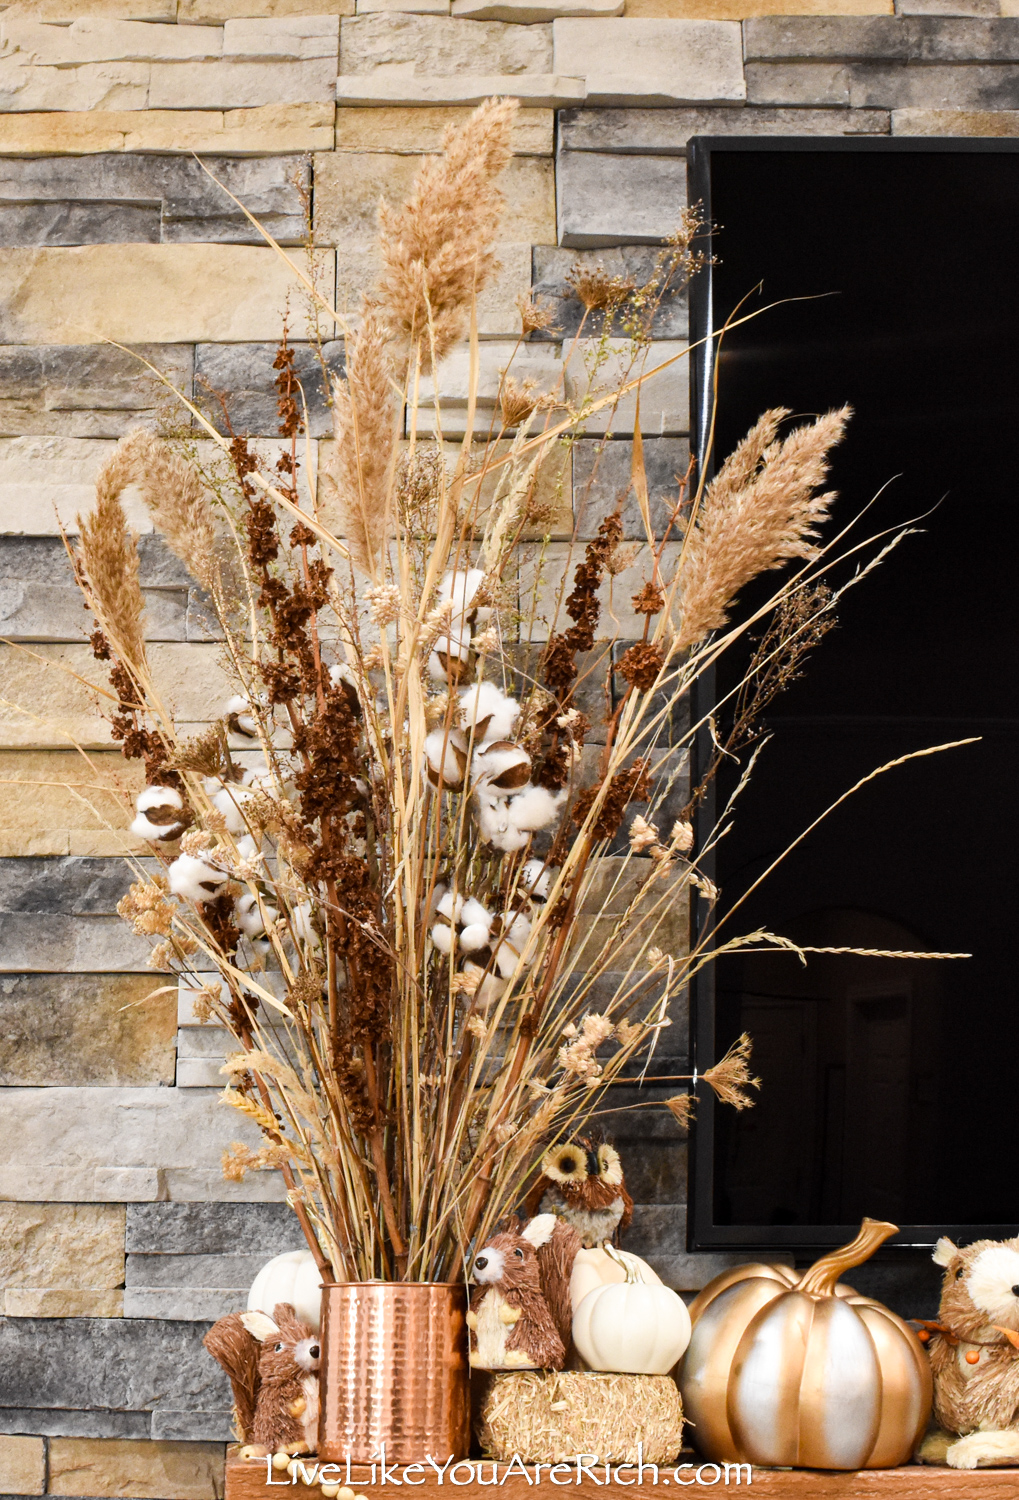 Natural Dried Floral Arrangements - Live Like You Are Rich